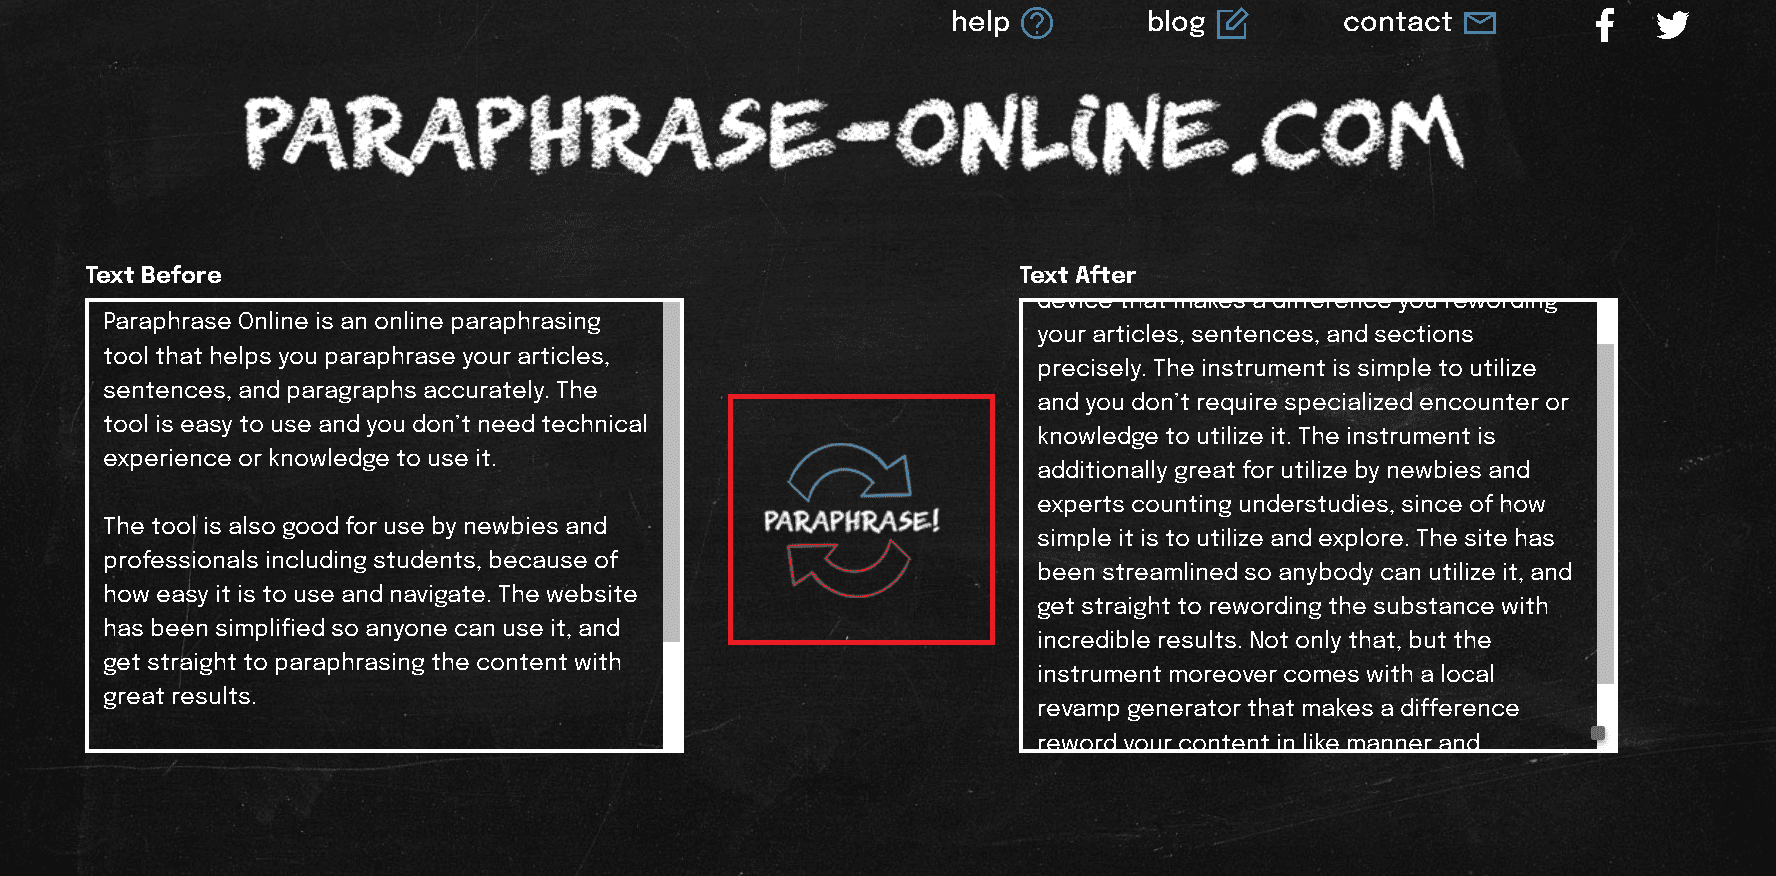 Paraphrase-Online example of paraphrased content